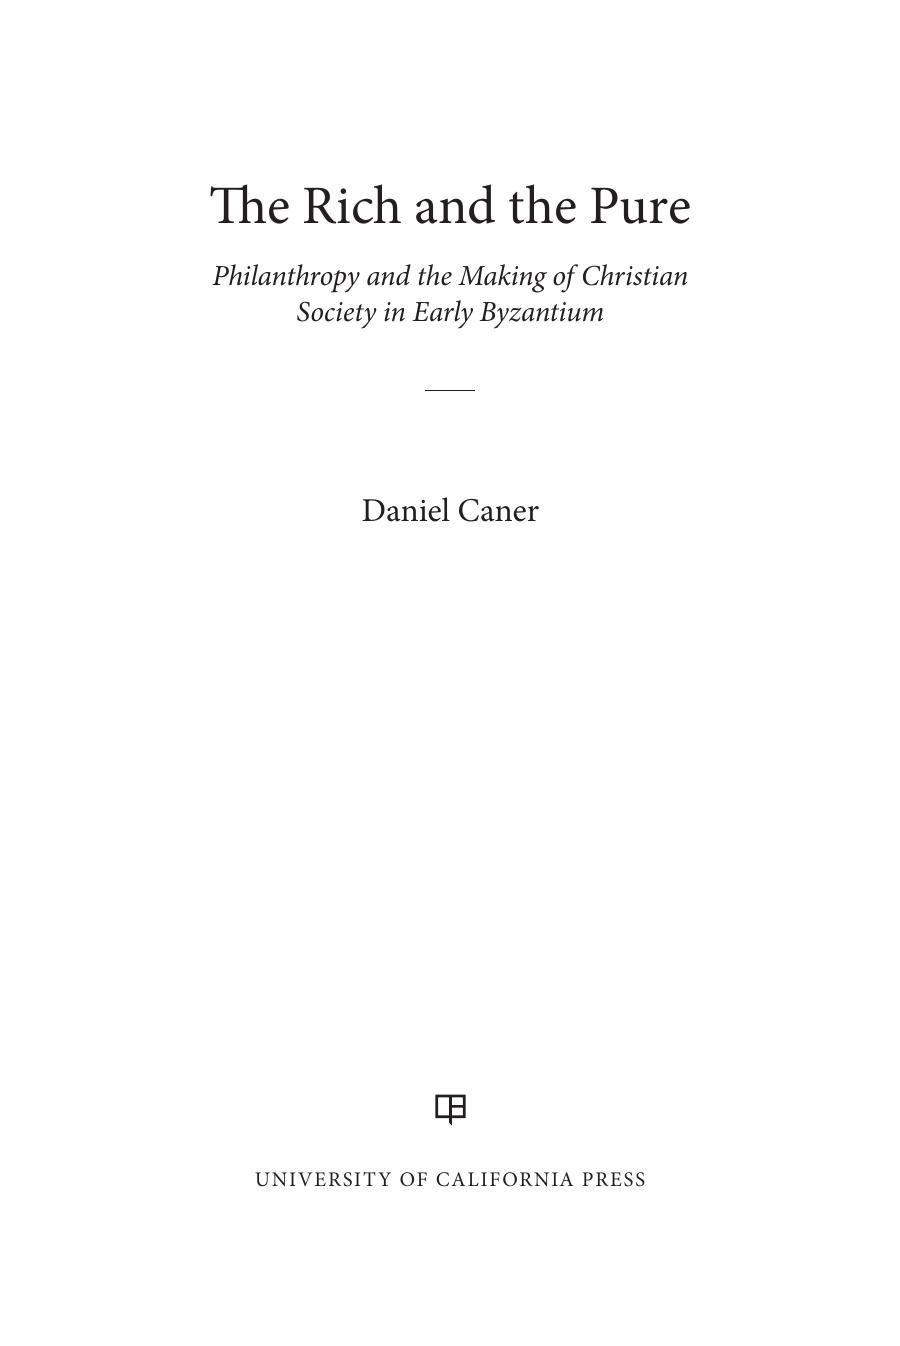 The Rich and the Pure: Philanthropy and the Making of Christian Society in Early Byzantium